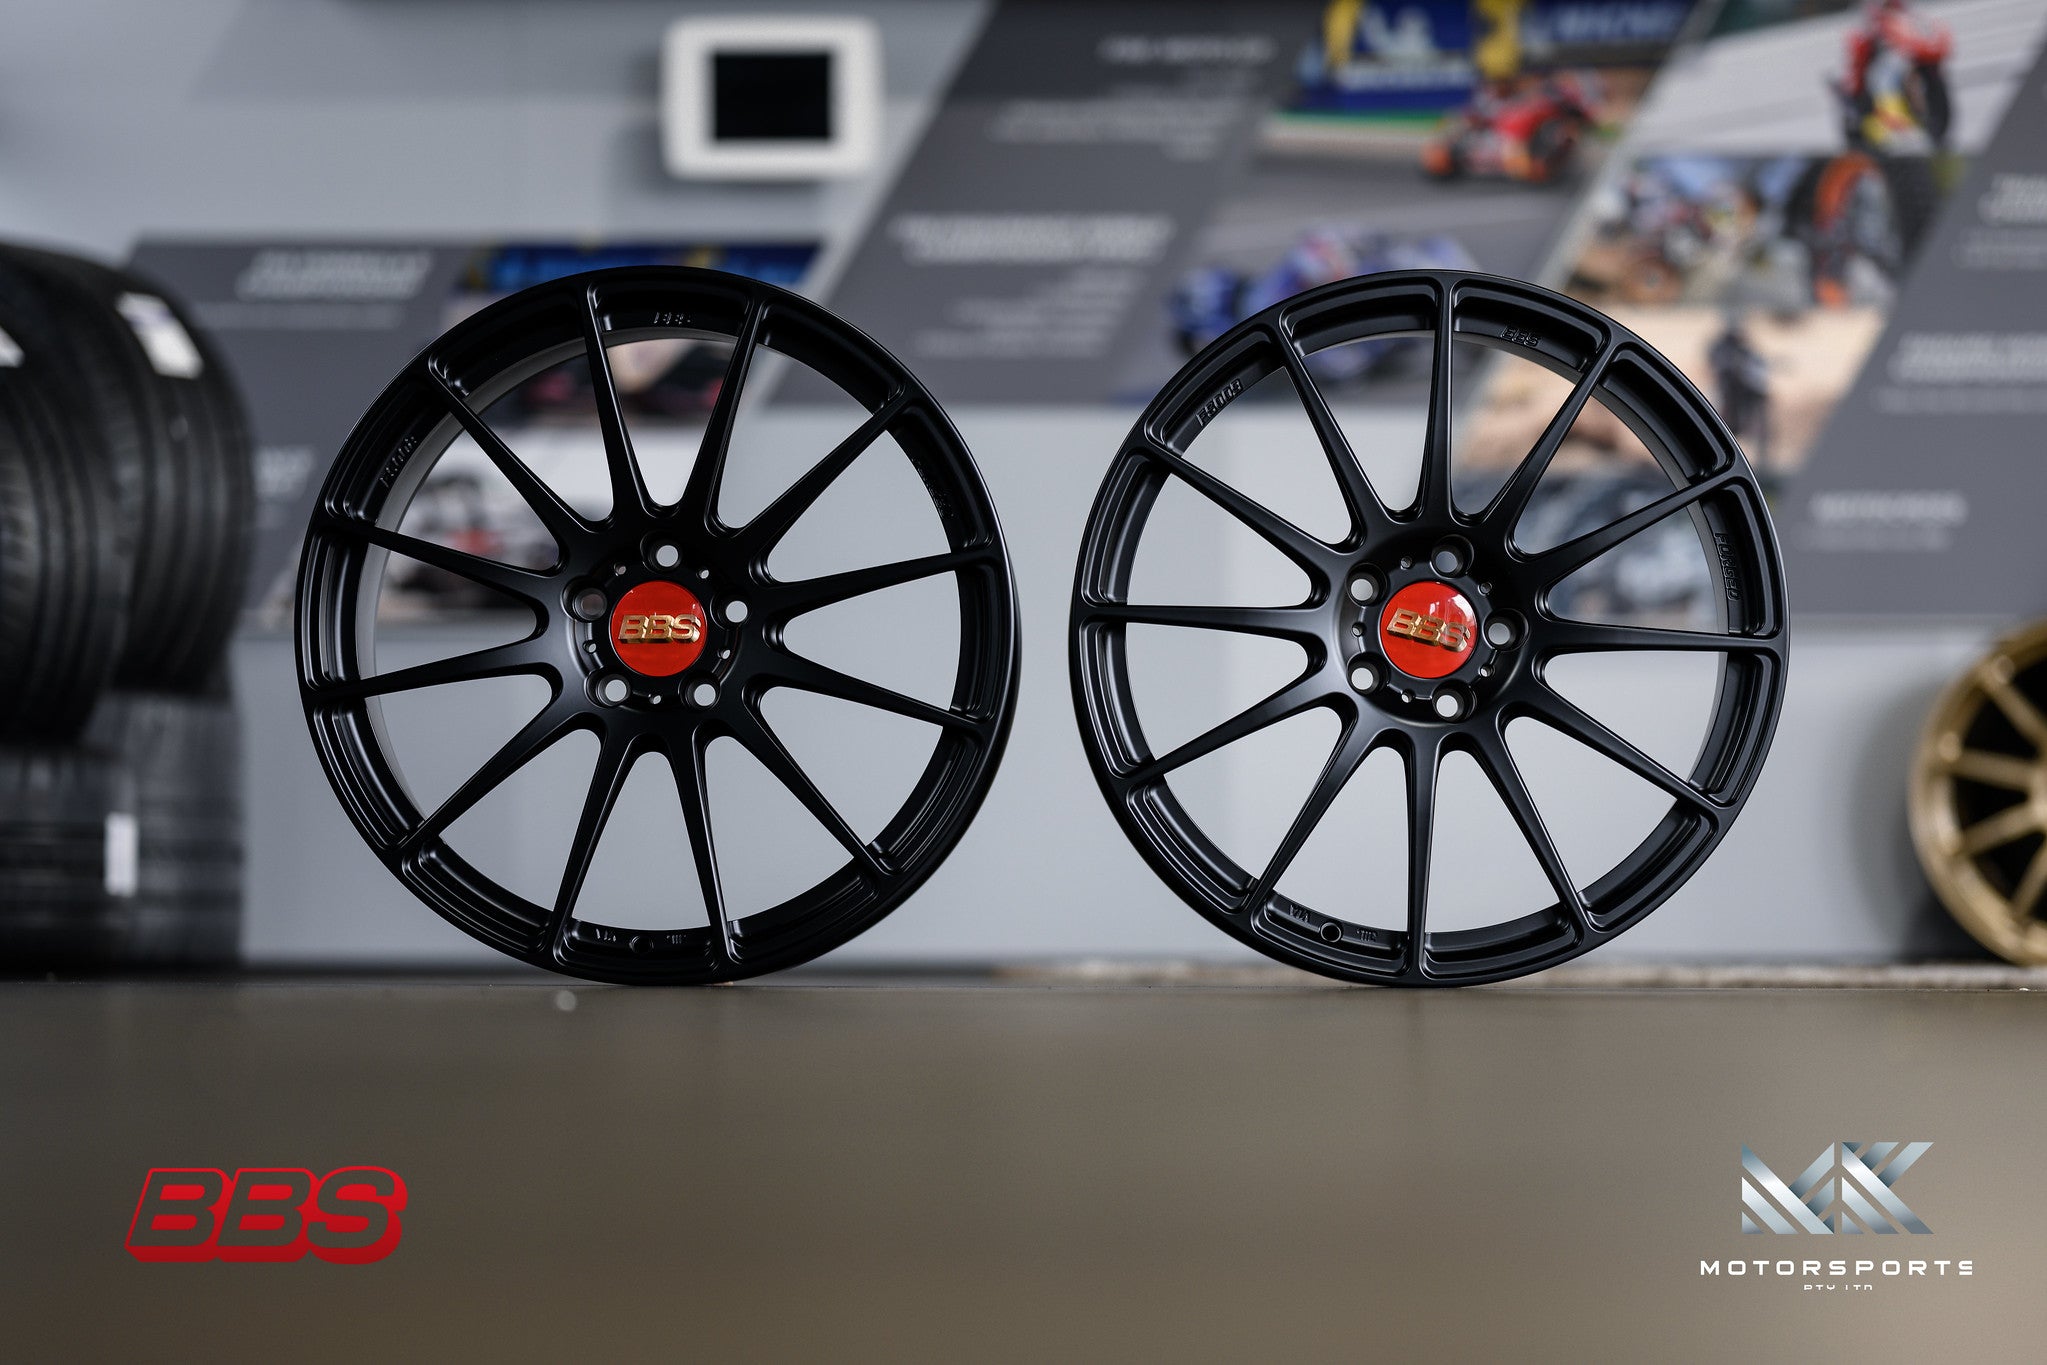 BBS FS for 8Y RS3 - Premium Wheels from BBS Japan - From just $6350! Shop now at MK MOTORSPORTS